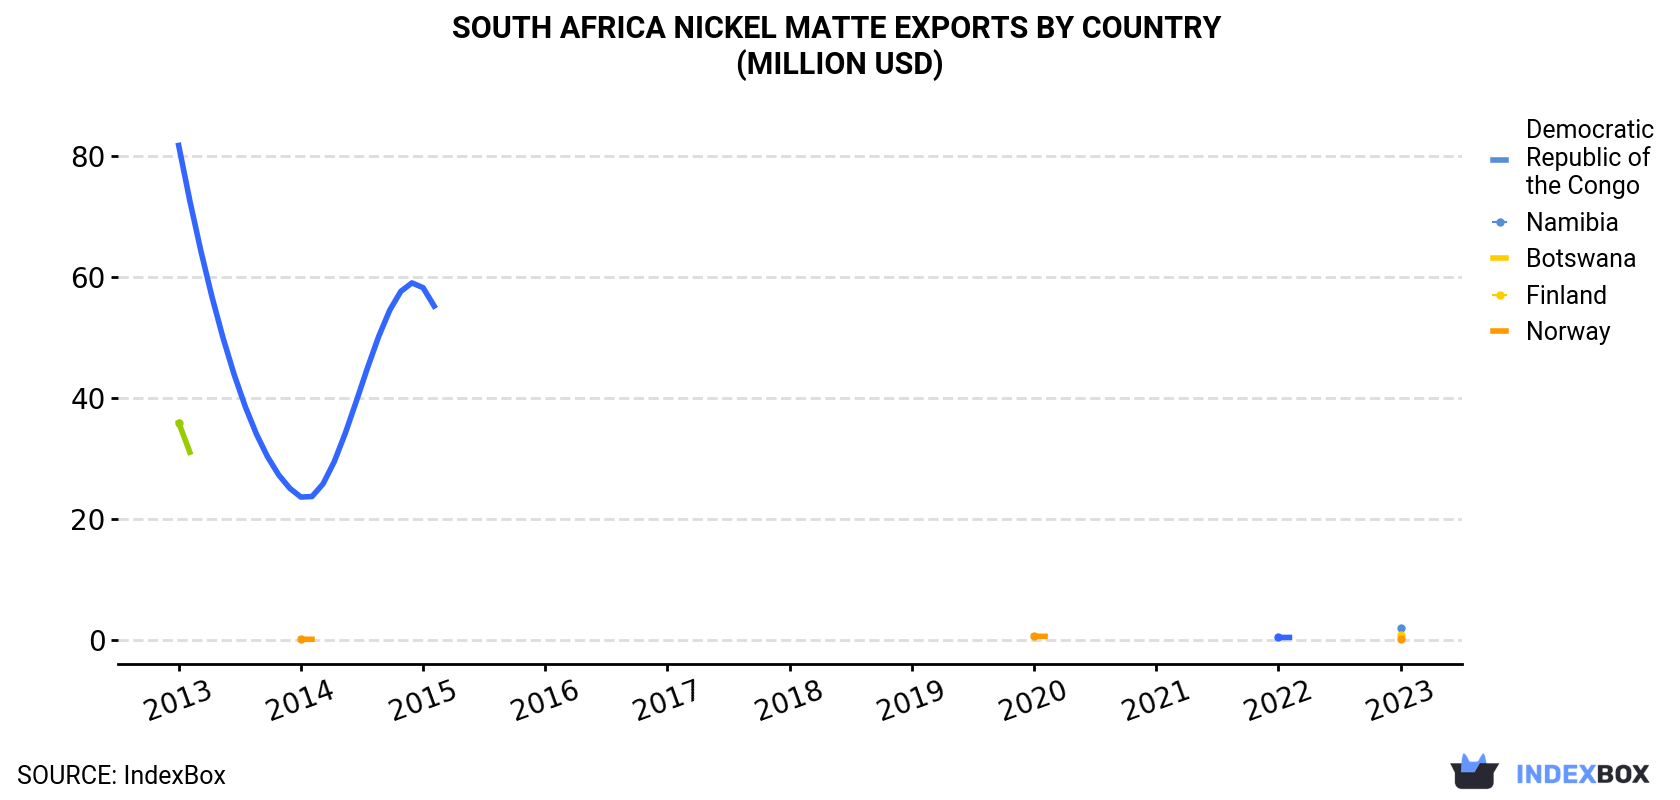 South Africa Nickel Matte Exports By Country (Million USD)